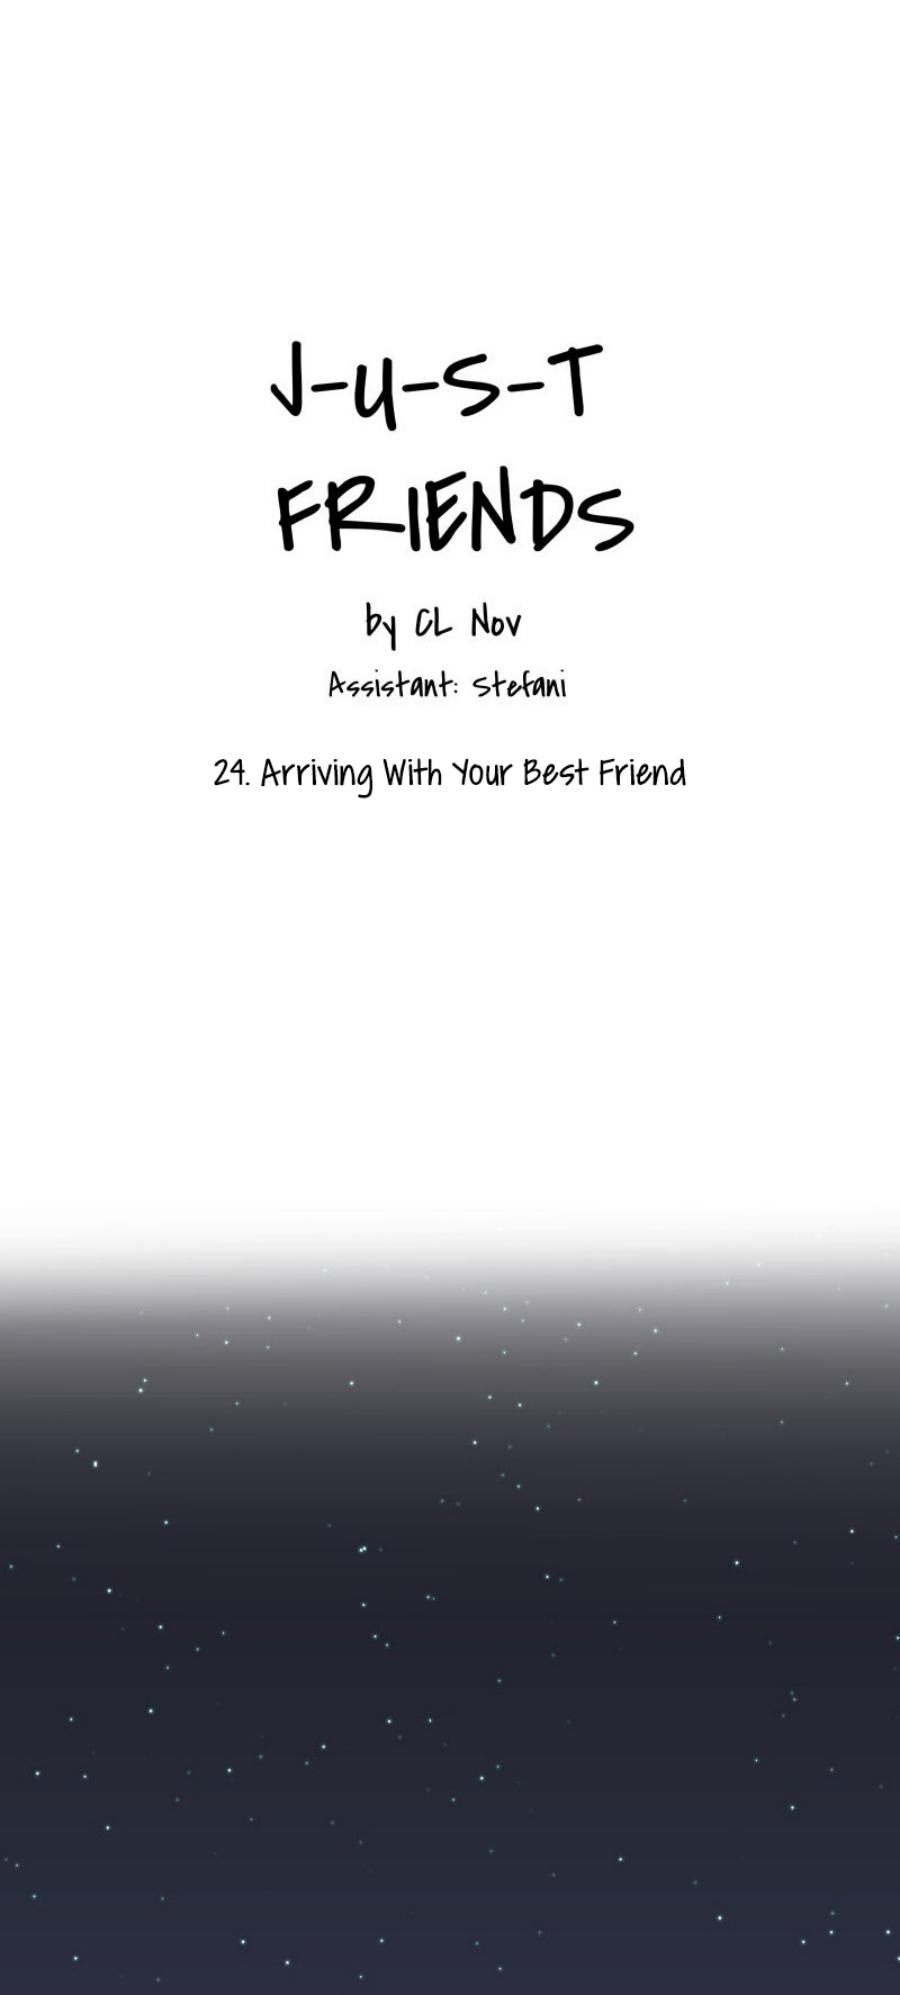 Just Friends Ch. 24 Arriving With Your Best Friend